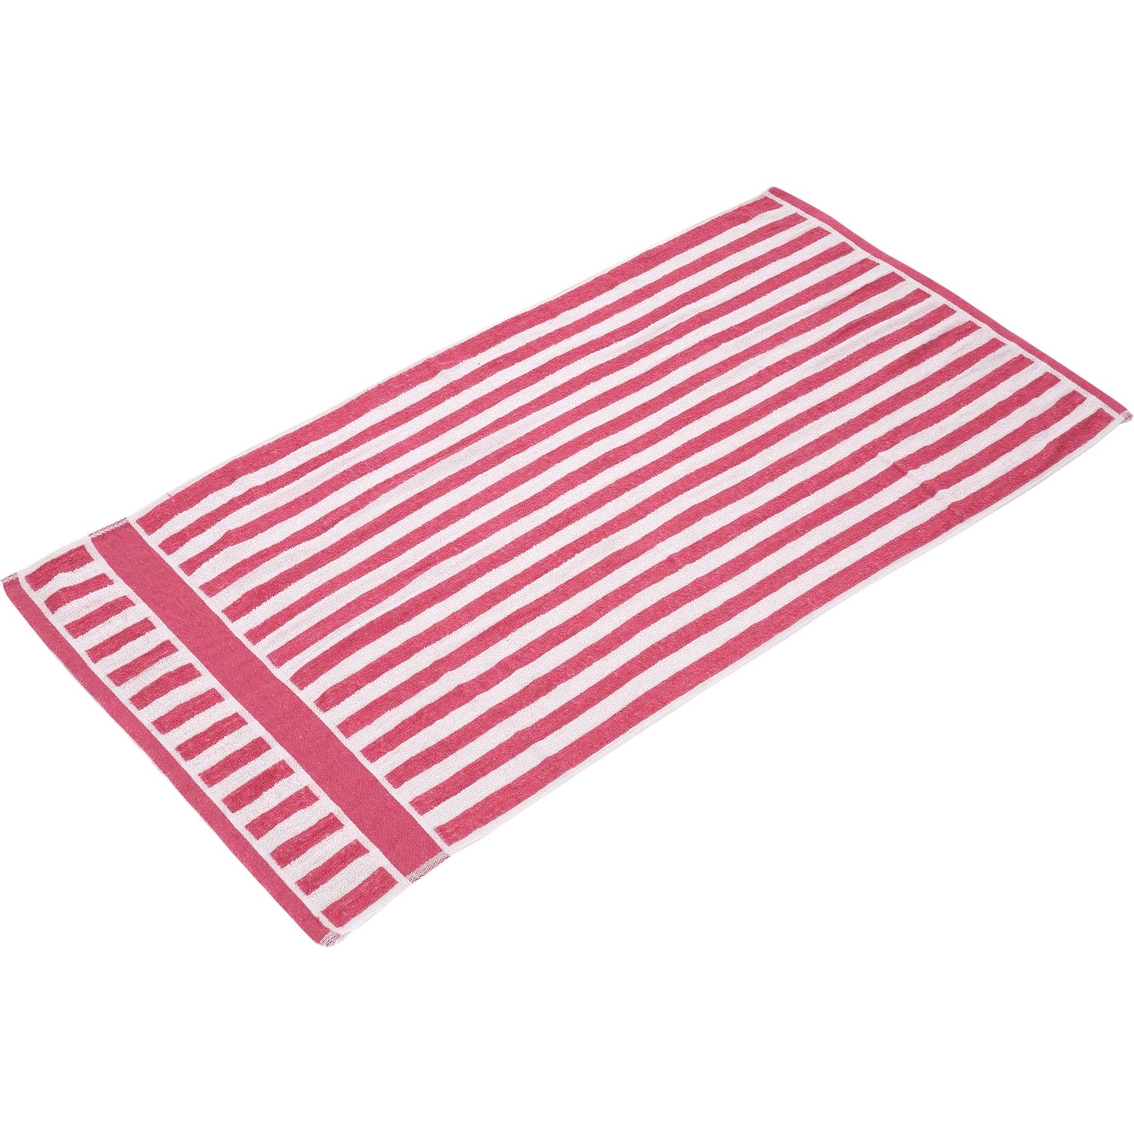 Simply Perfect Beach Towels 2 pk. - Image 4 of 6